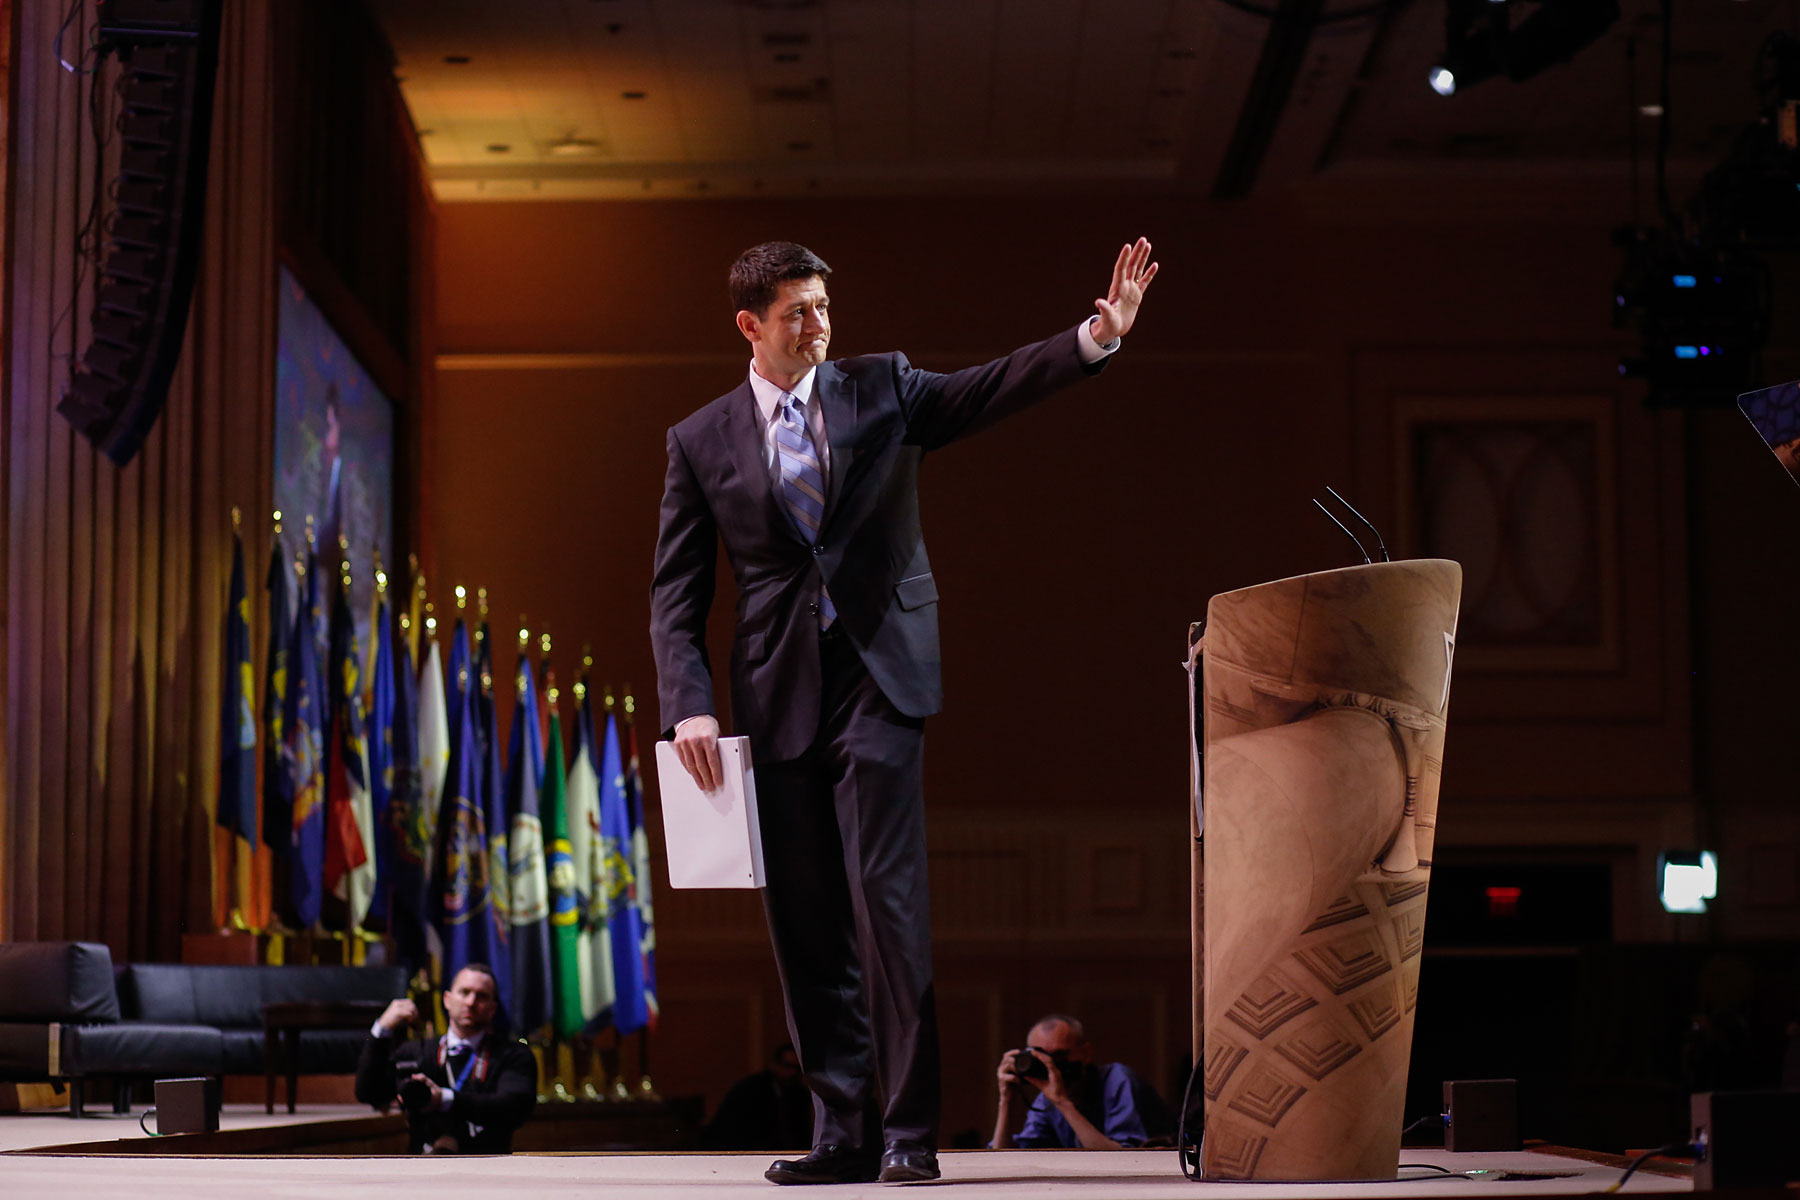 Congressman Paul Ryan, of Wisconsin, waves to the crowd after speaking during the Conservative Political Action Conference at the Gaylord National Resort &amp; Convention Center in National Harbor, Md., March 6, 2014. (Lexey Swall—GRAIN for TIME)